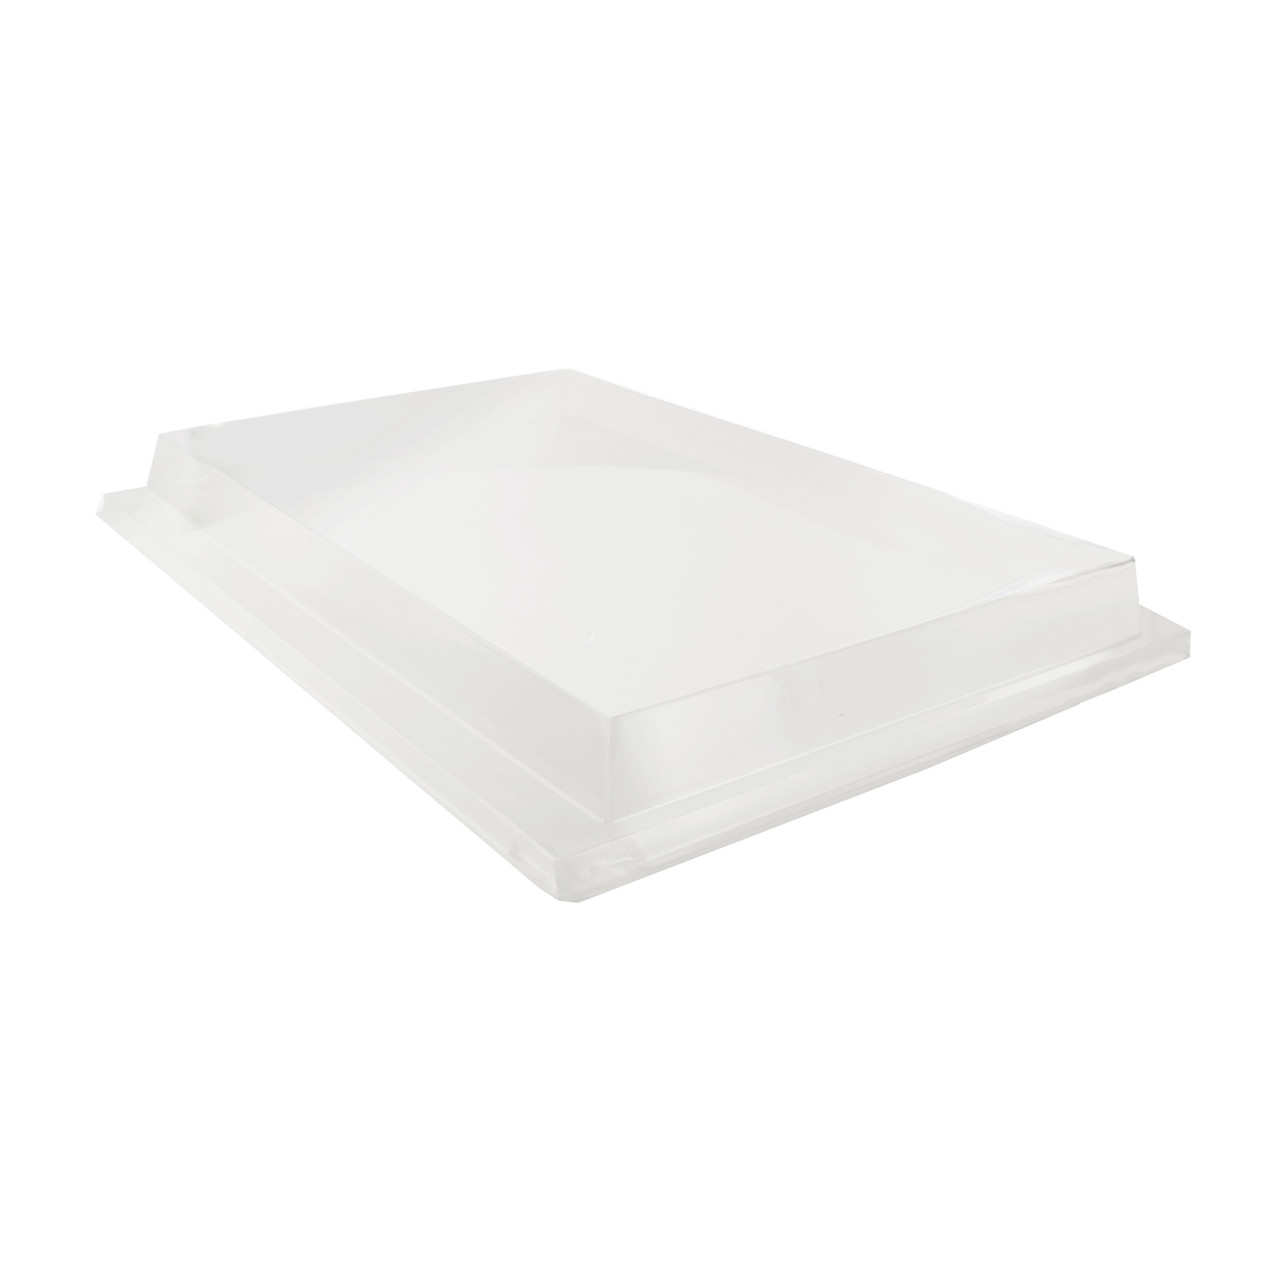 Clear PET Lid For 210APUTRP11 - L:15.05 x W:11 x H:1.5in